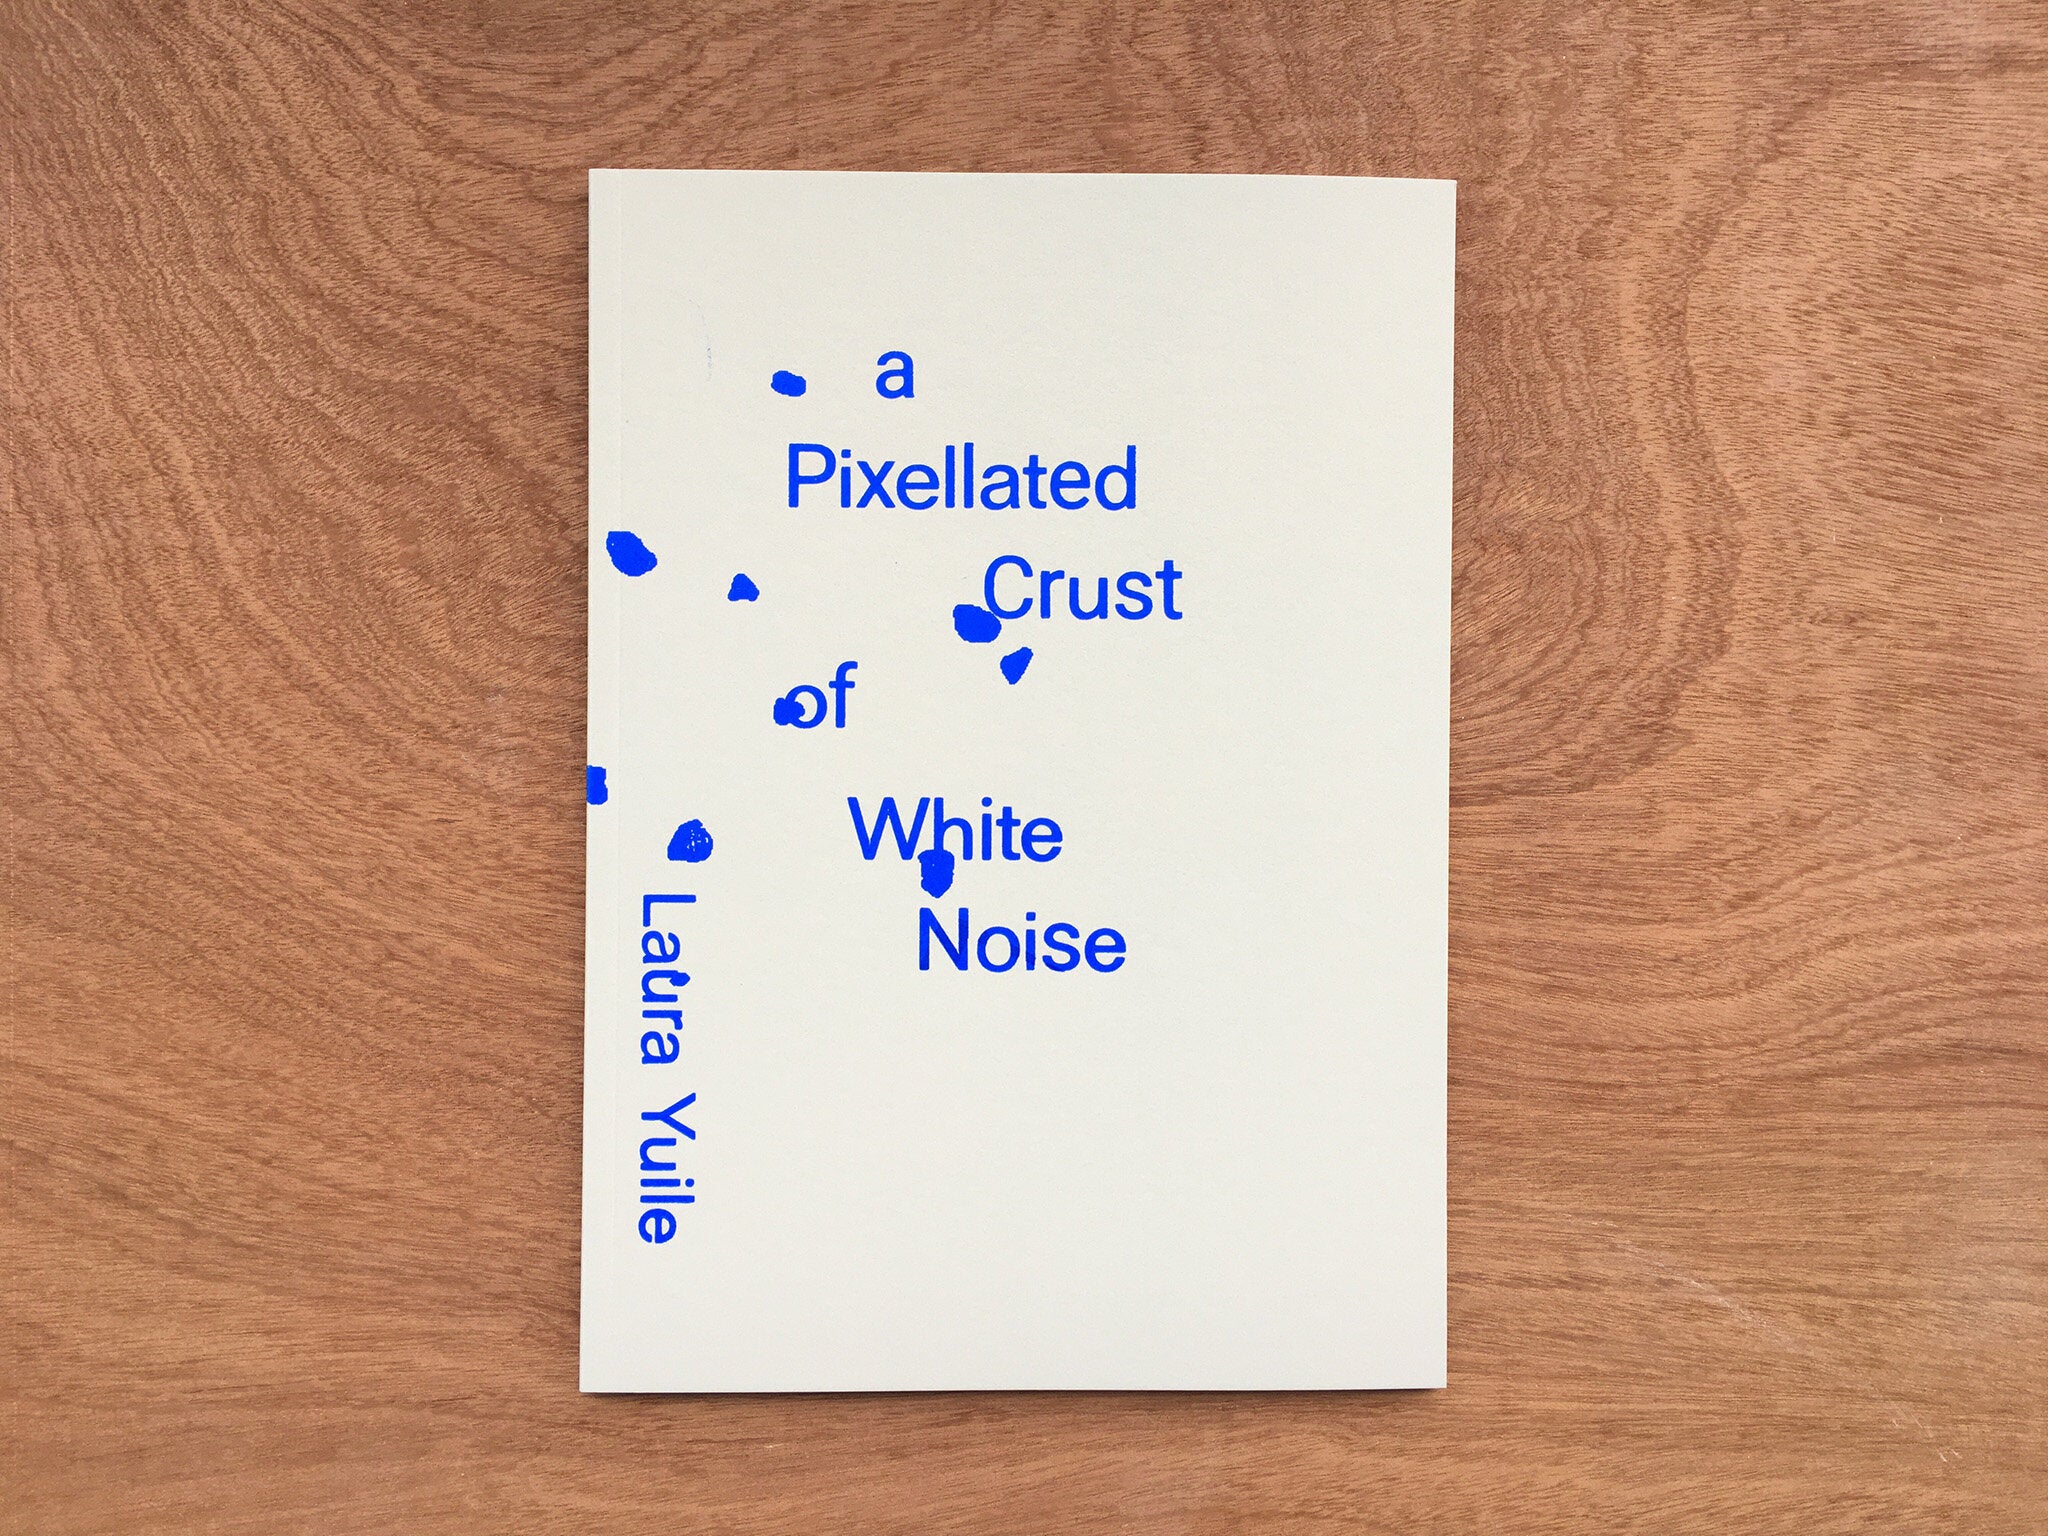 A PIXELLATED CRUST OF WHITE NOISE by Laura Yuile